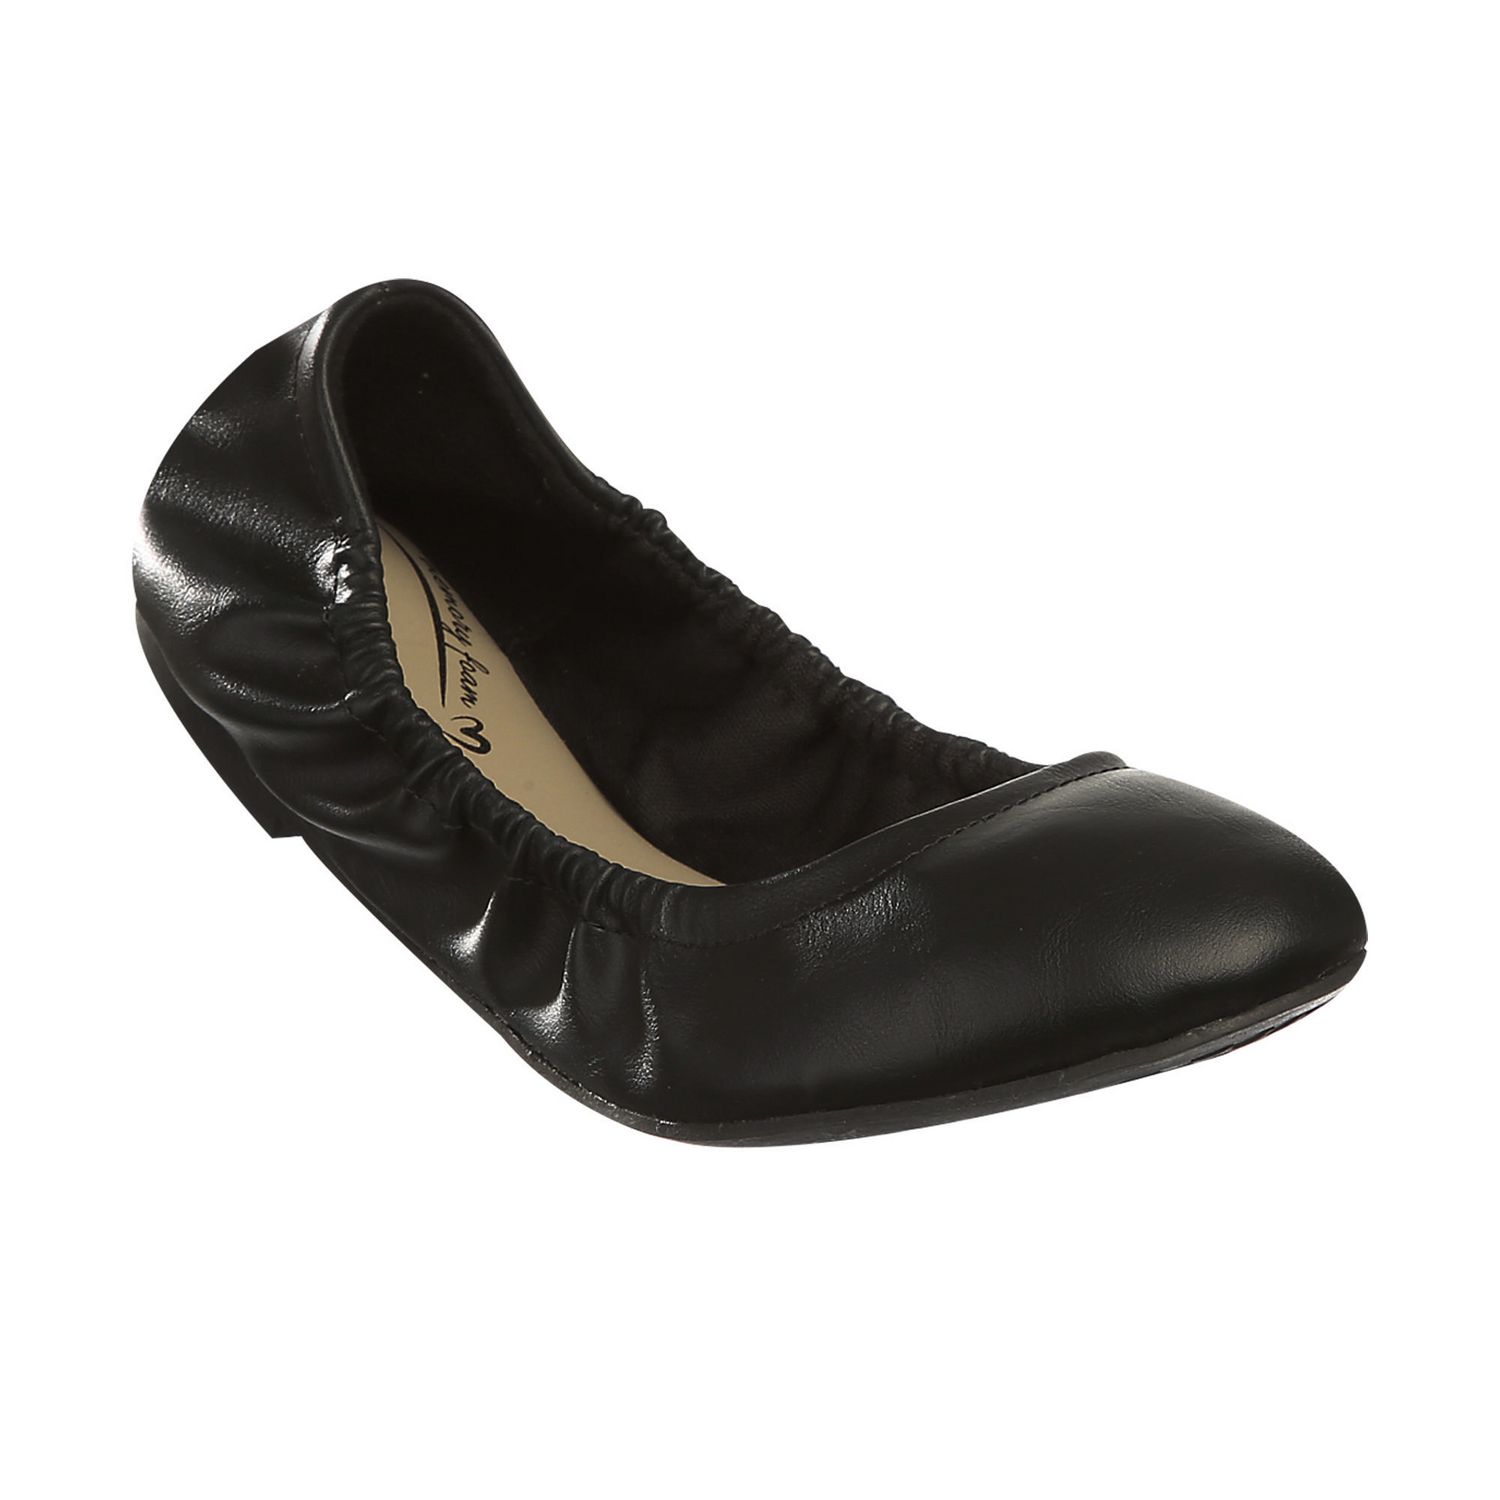 george women's shoes